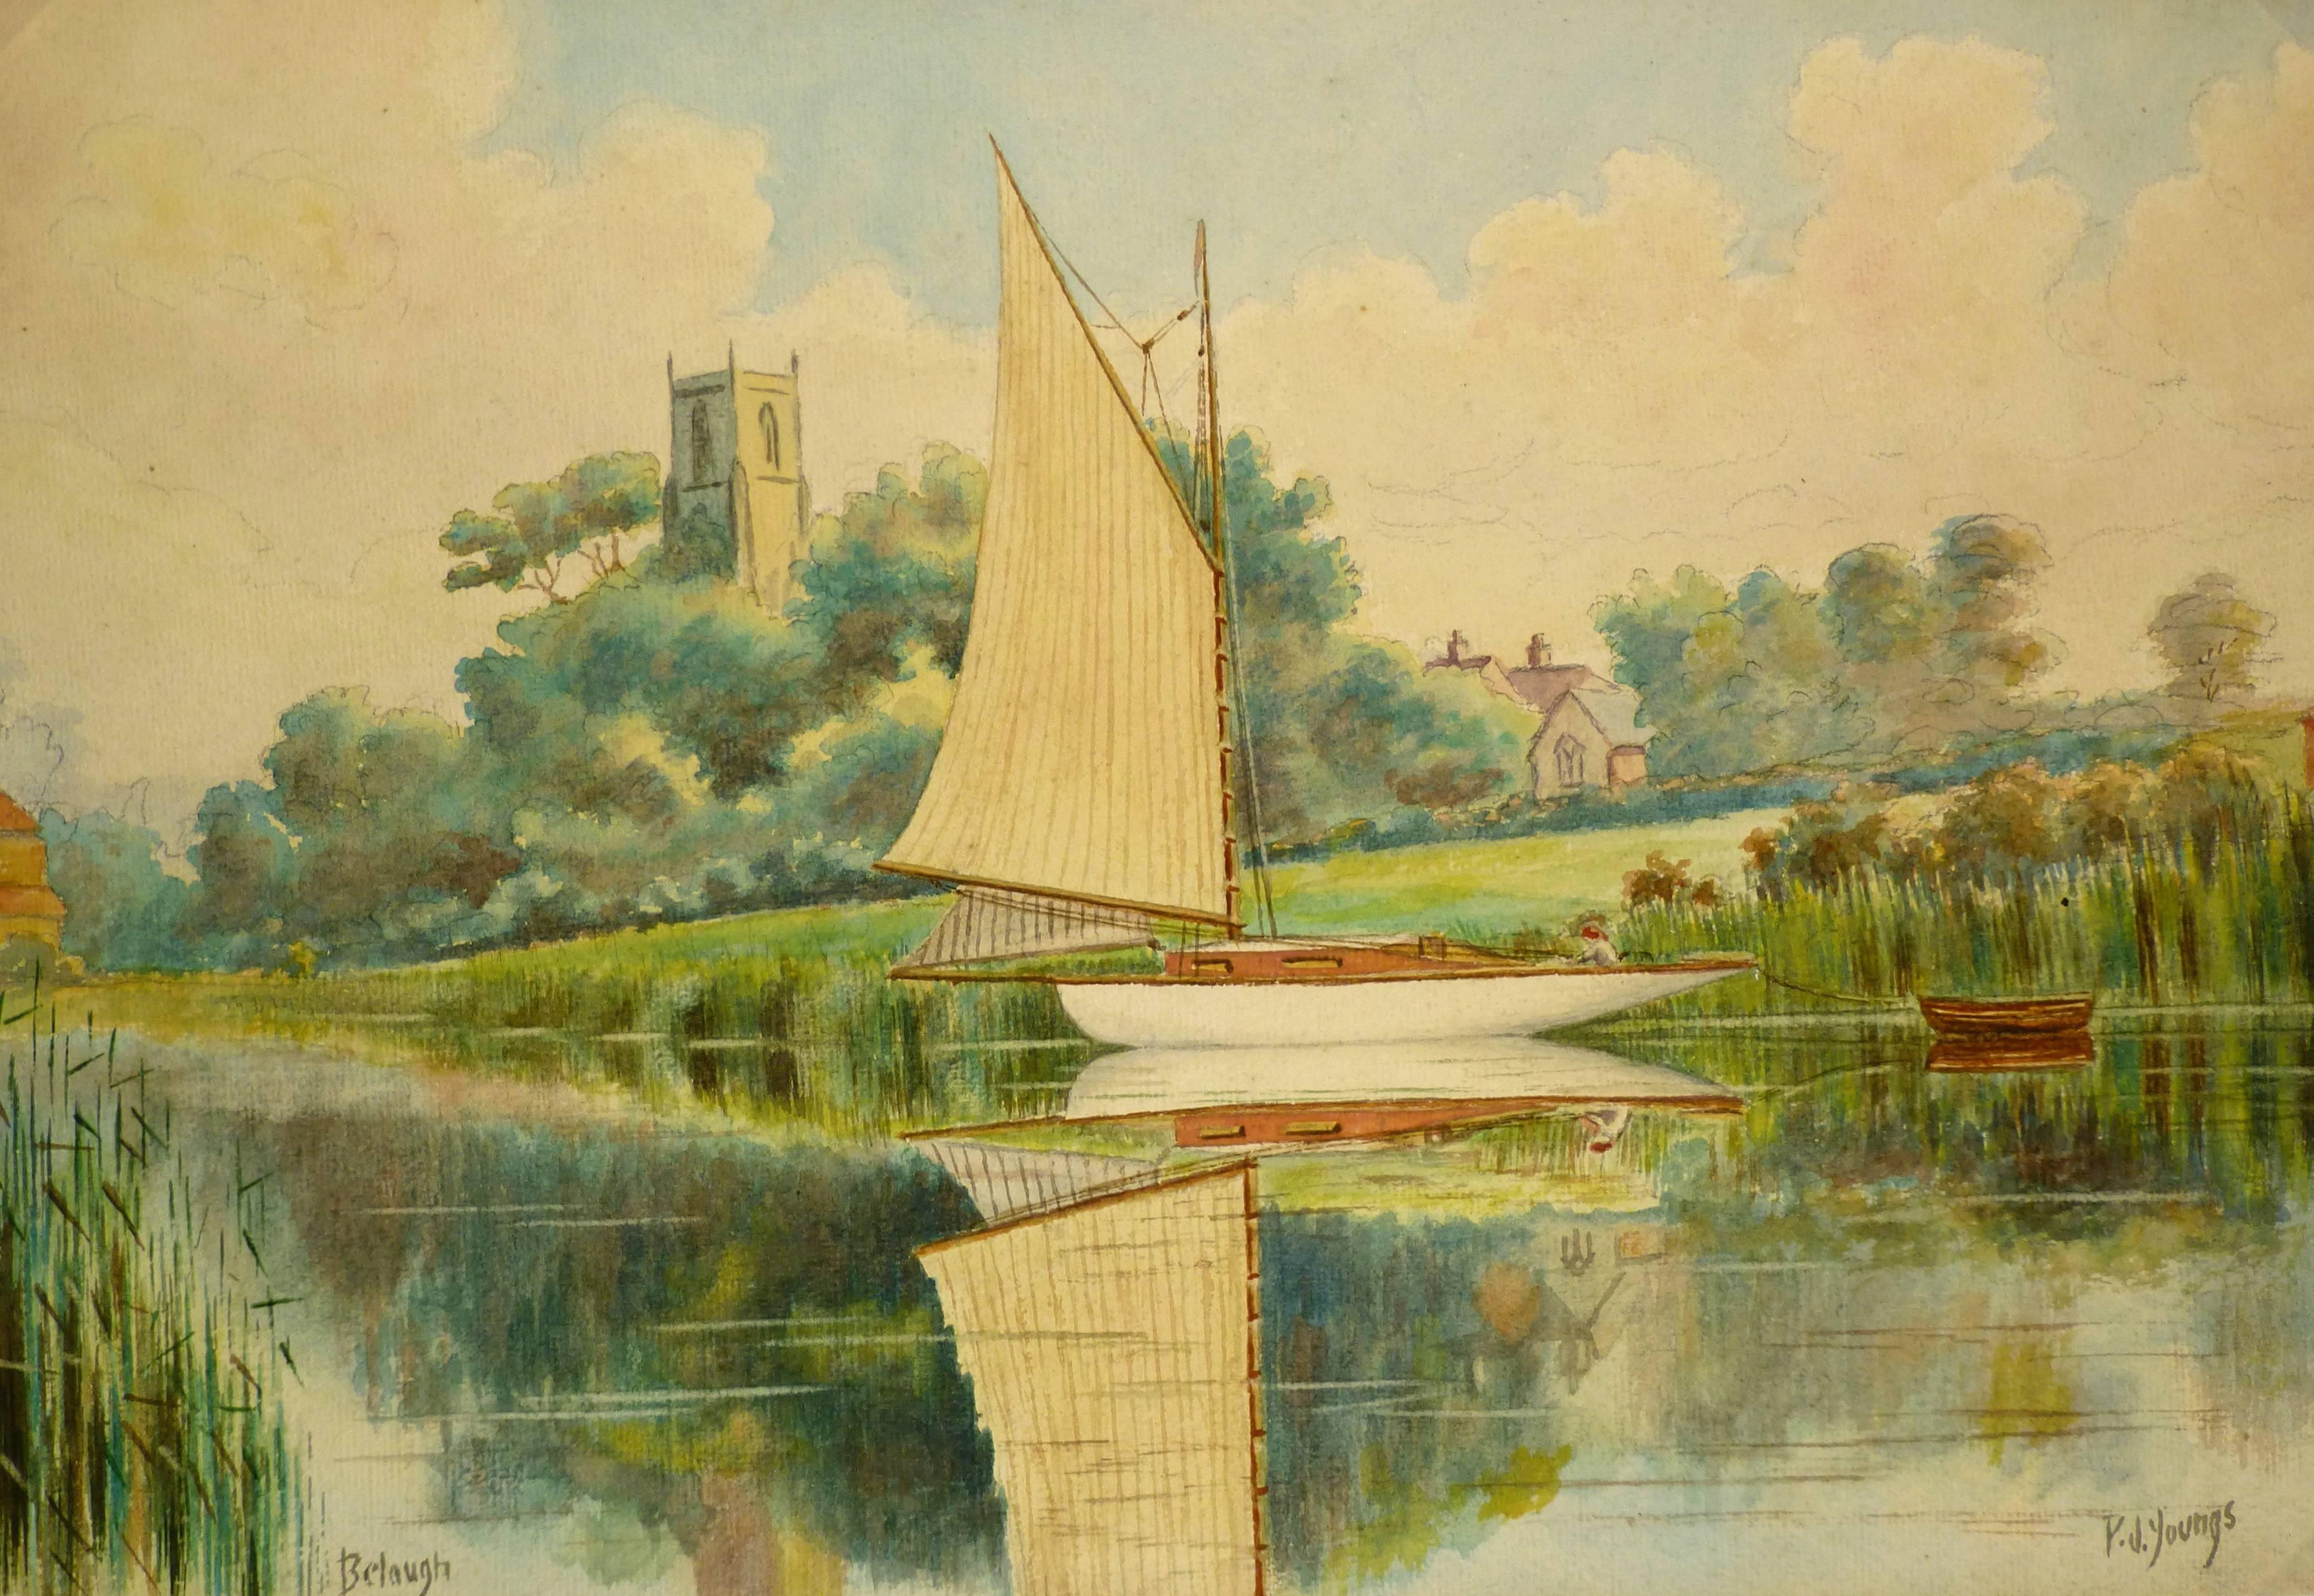 P.J. Youngs Landscape Art - English Watercolor of Sailboat on Norfolk Broads